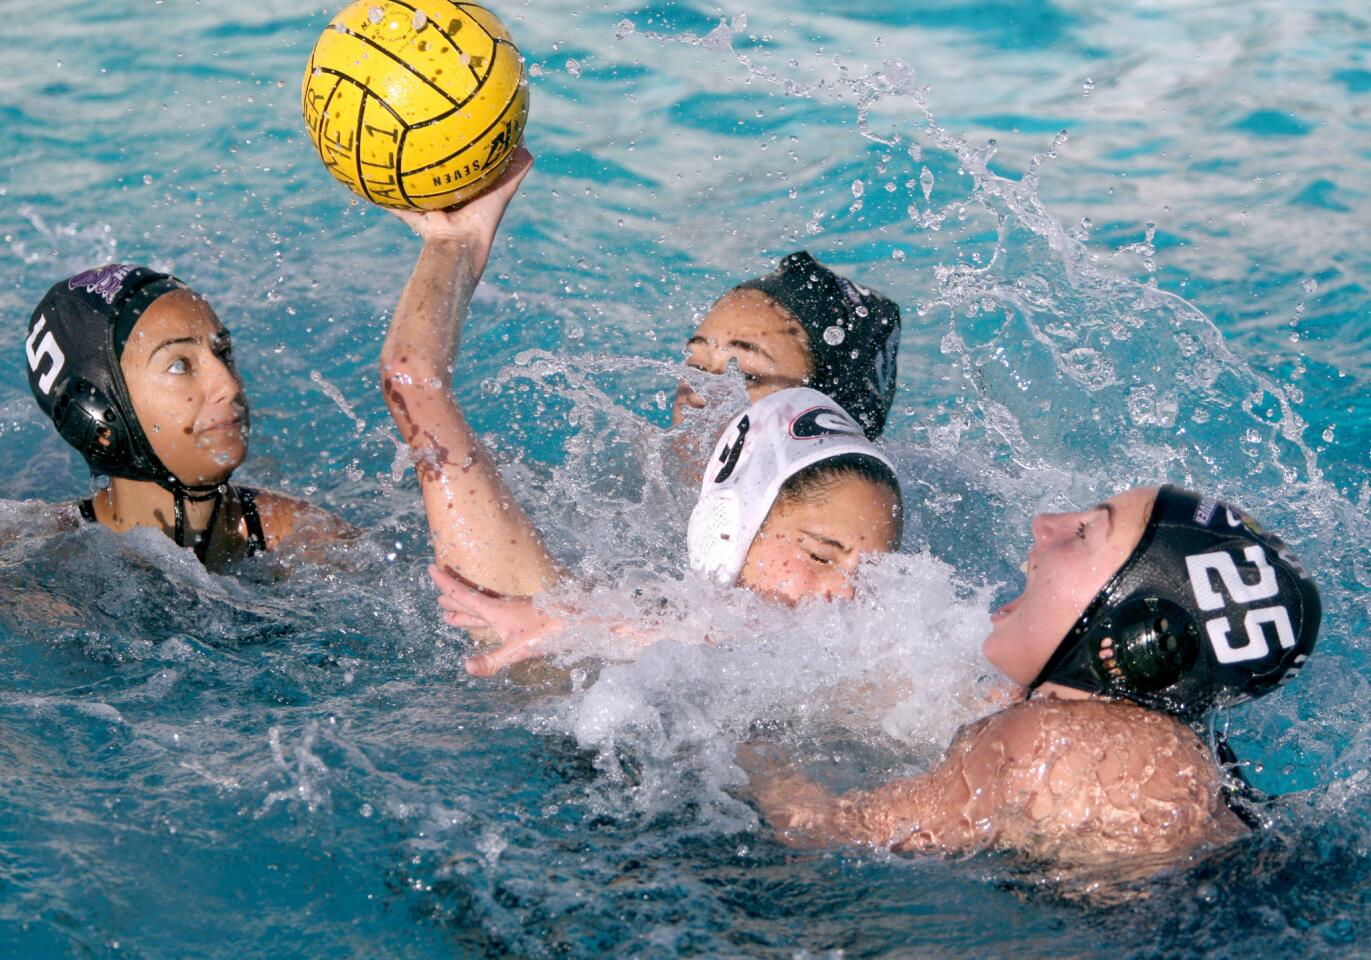 Glendale High School's water polo player #9 Lori Berberian manages to get a shot off even though triple-teamed by Hoover High School in game at HHS in Glendale on Tuesday, January 12, 2016. Glendale won 16-7.